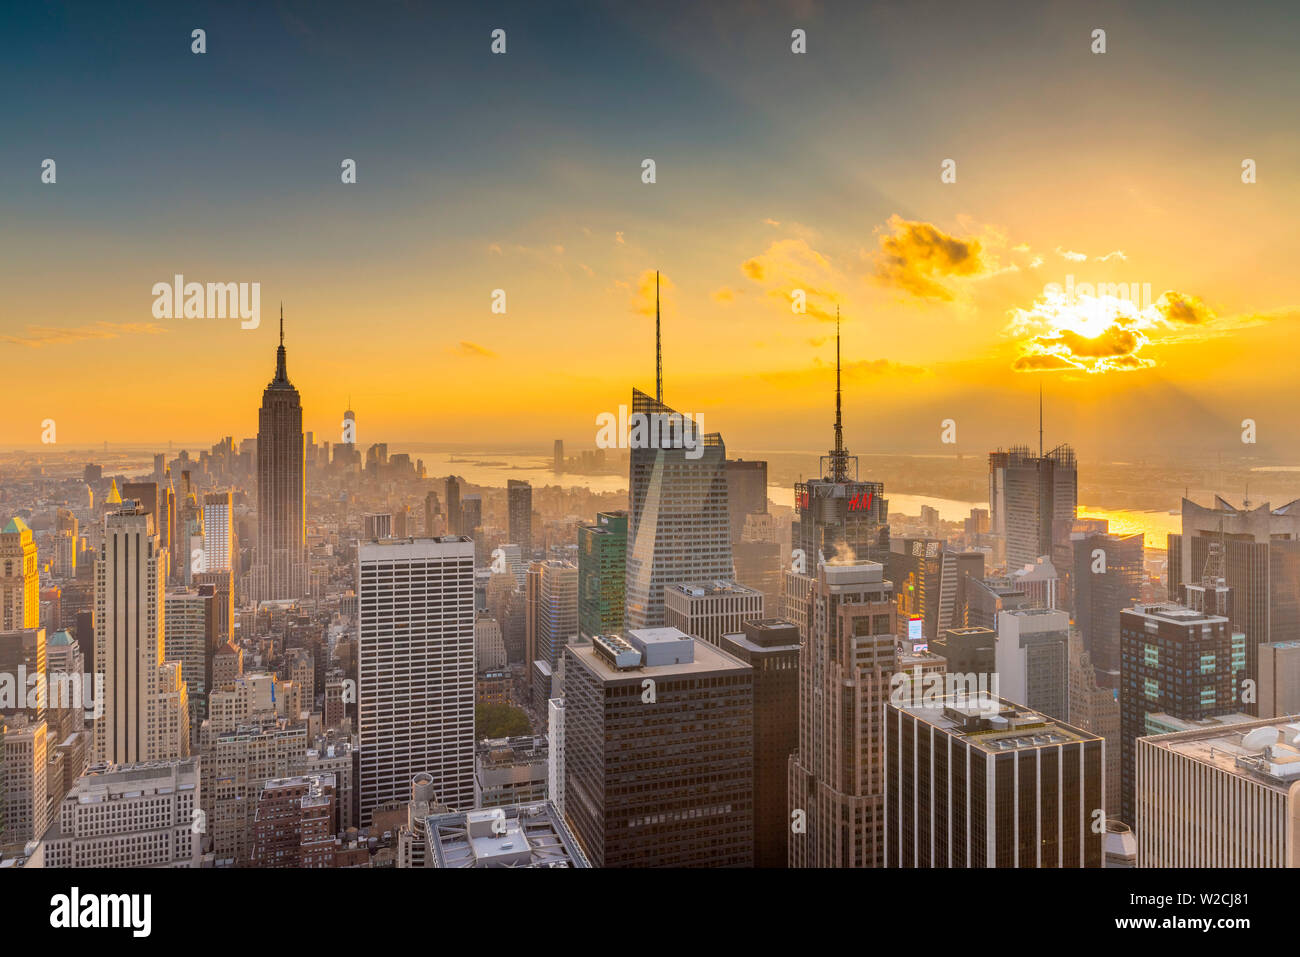 USA, New York, Midtown and Lower Manhattan, Empire State Building Stock Photo